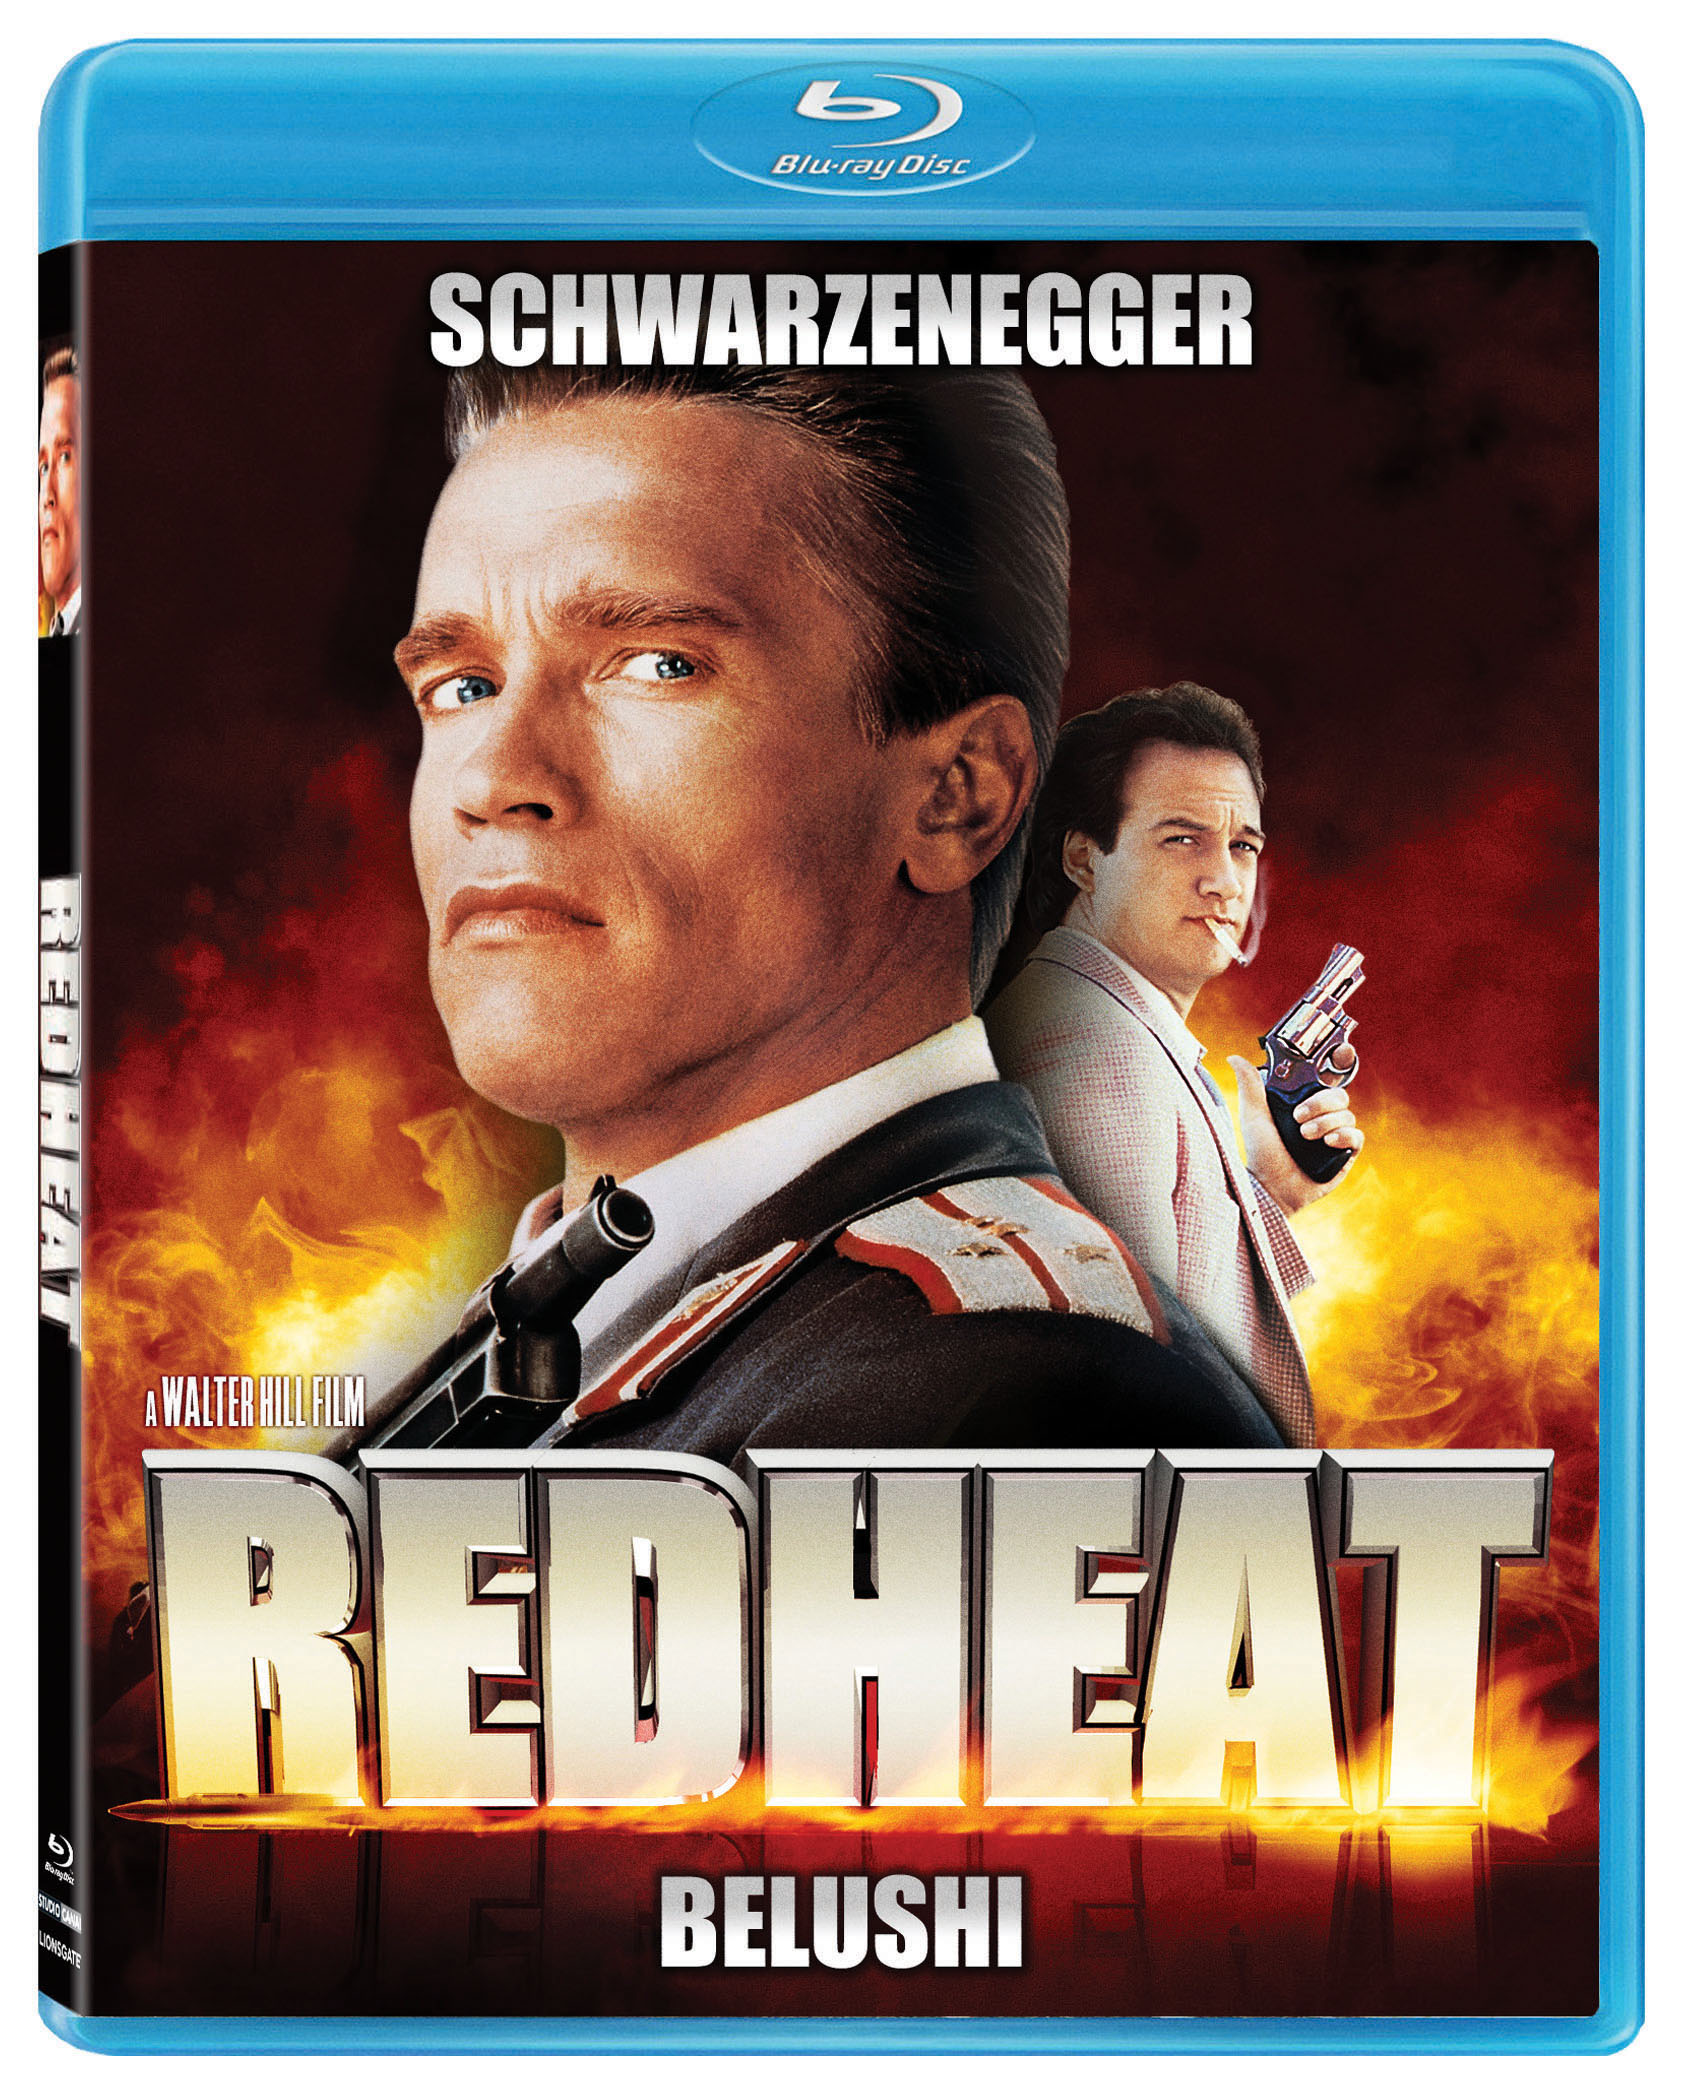 Amazing Red Heat Pictures & Backgrounds